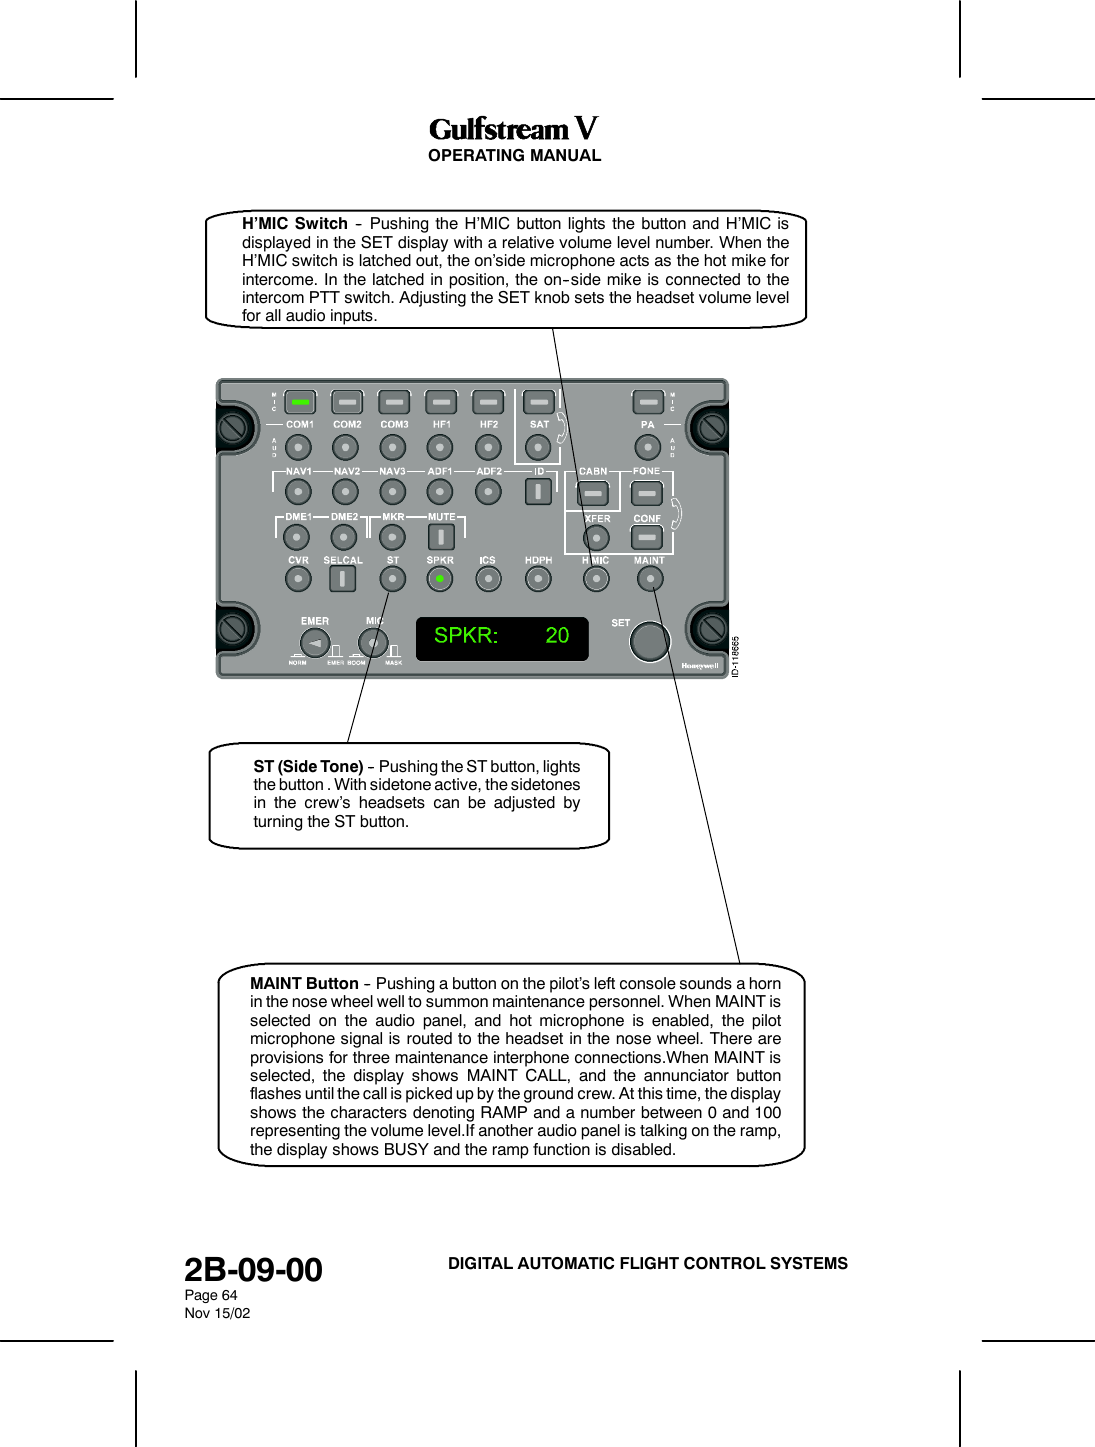 OPERATING MANUAL2B-09-00Page 64Nov 15/02DIGITAL AUTOMATIC FLIGHT CONTROL SYSTEMSST (Side Tone) -- Pushing the ST button, lightsthe button . With sidetone active, the sidetonesin the crew’s headsets can be adjusted byturning the ST button.H’MIC Switch -- Pushing the H’MIC button lights the button and H’MIC isdisplayed in the SET display with a relative volume level number. When theH’MIC switch is latched out, the on’side microphone acts as the hot mike forintercome. In the latched in position, the on--side mike is connected to theintercom PTT switch. Adjusting the SET knob sets the headset volume levelfor all audio inputs.MAINT Button -- Pushing a button on the pilot’s left console sounds a hornin the nose wheel well to summon maintenance personnel. When MAINT isselected on the audio panel, and hot microphone is enabled, the pilotmicrophone signal is routed to the headset in the nose wheel. There areprovisions for three maintenance interphone connections.When MAINT isselected, the display shows MAINT CALL, and the annunciator buttonflashes until the call is picked up by the ground crew. At this time, the displayshows the characters denoting RAMP and a number between 0 and 100representing the volume level.If another audio panel is talking on the ramp,the display shows BUSY and the ramp function is disabled.